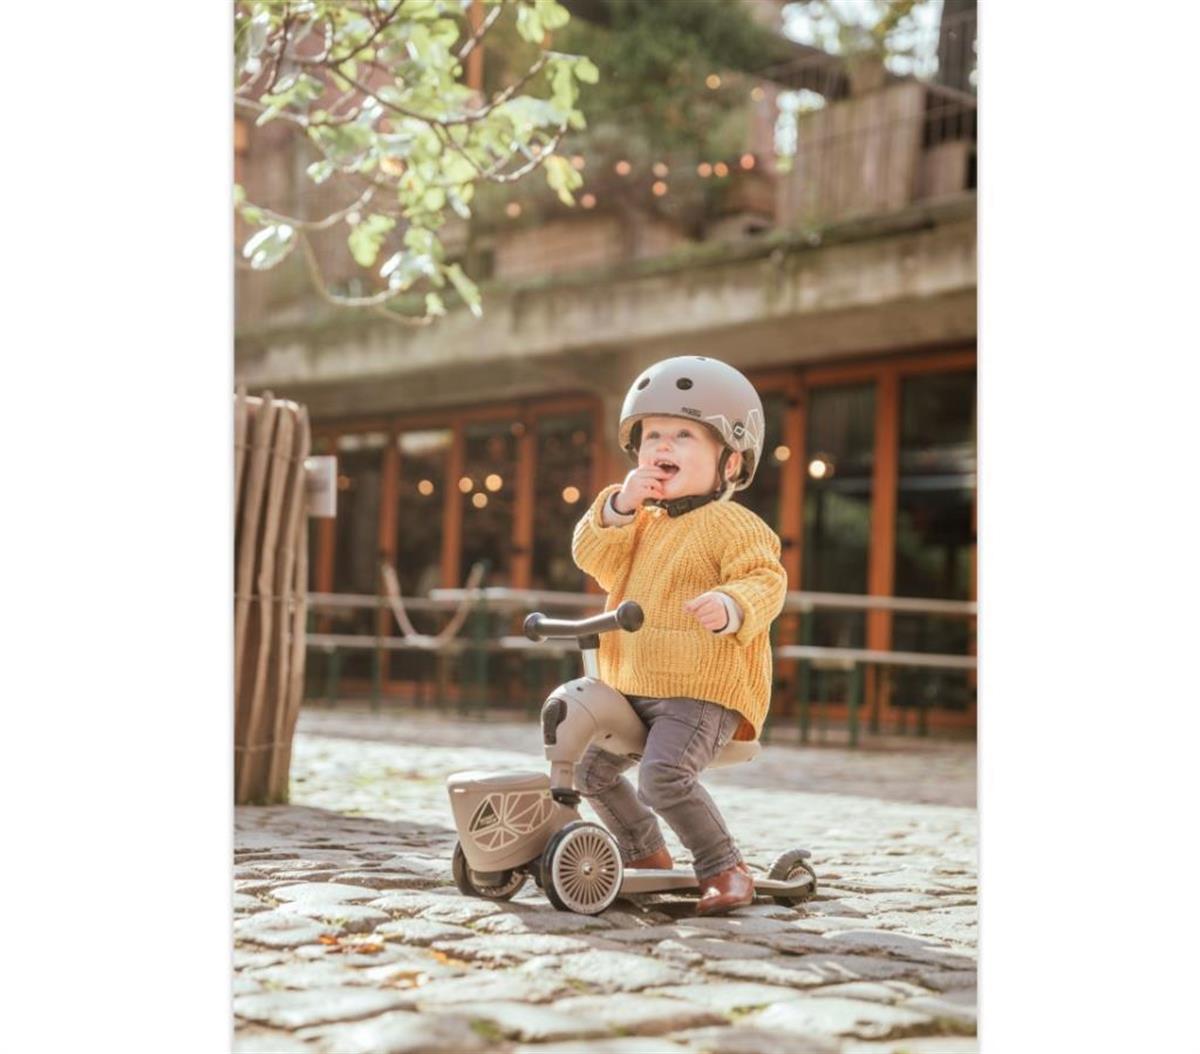 Scoot and Ride Highwaykick 1 Lifestyle Scooter - Brown Lines 210621-96605 | Toysall